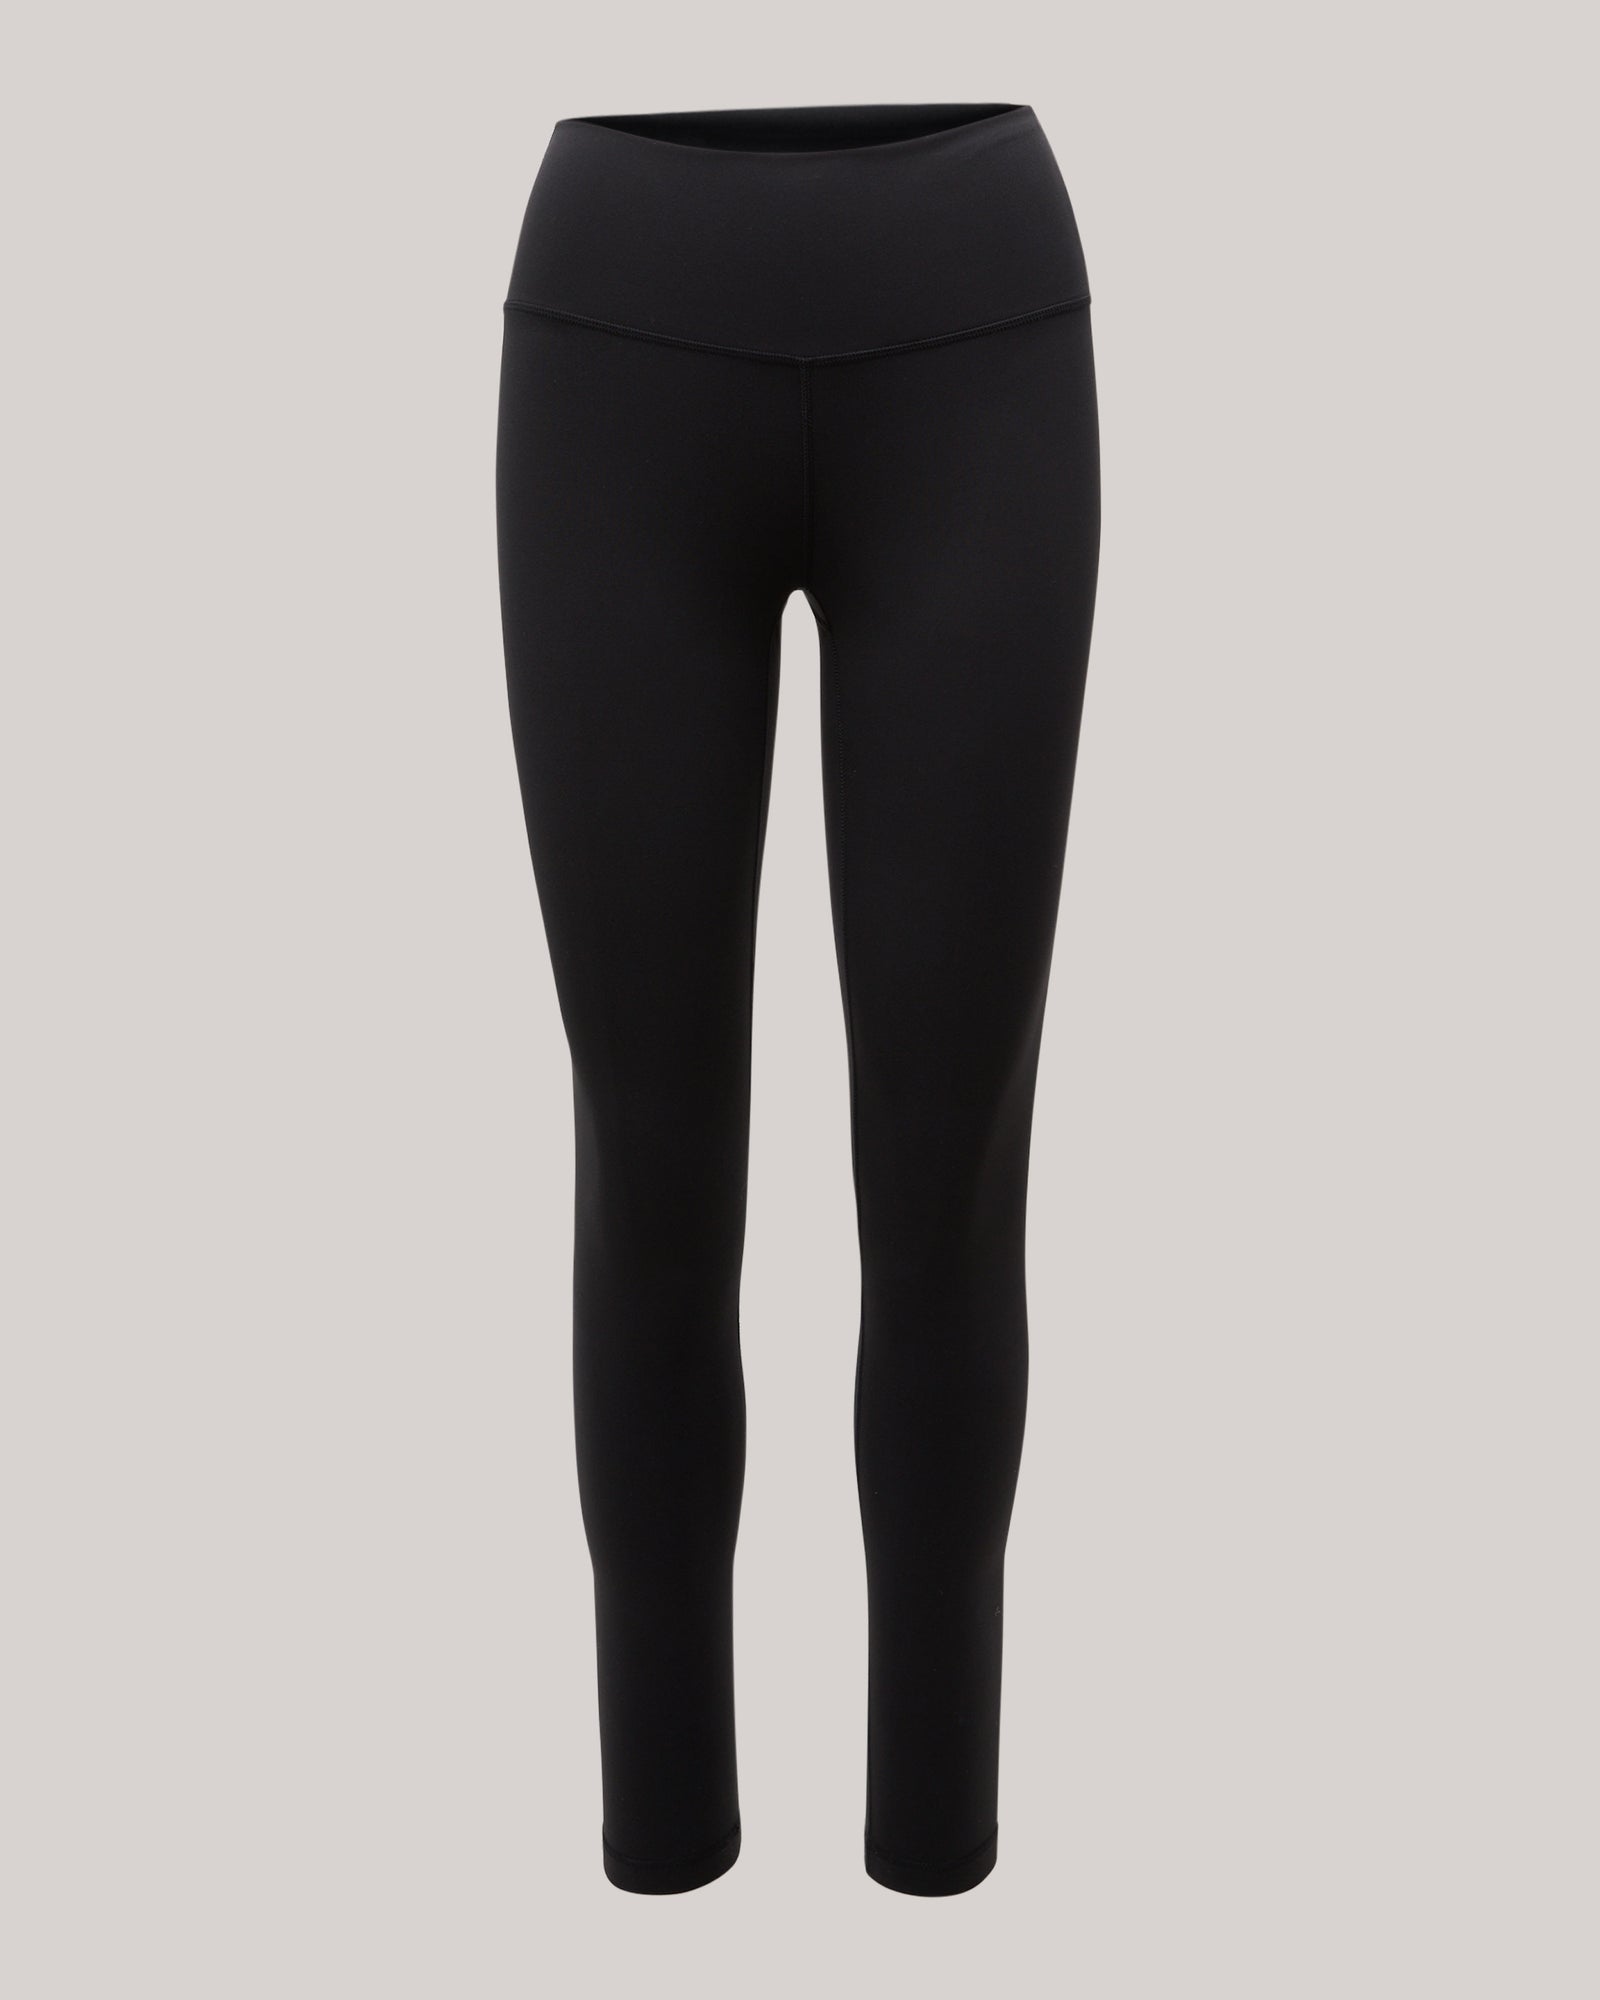 Product Description+ The TLF™ SIREN LEGGINGS is the perfect